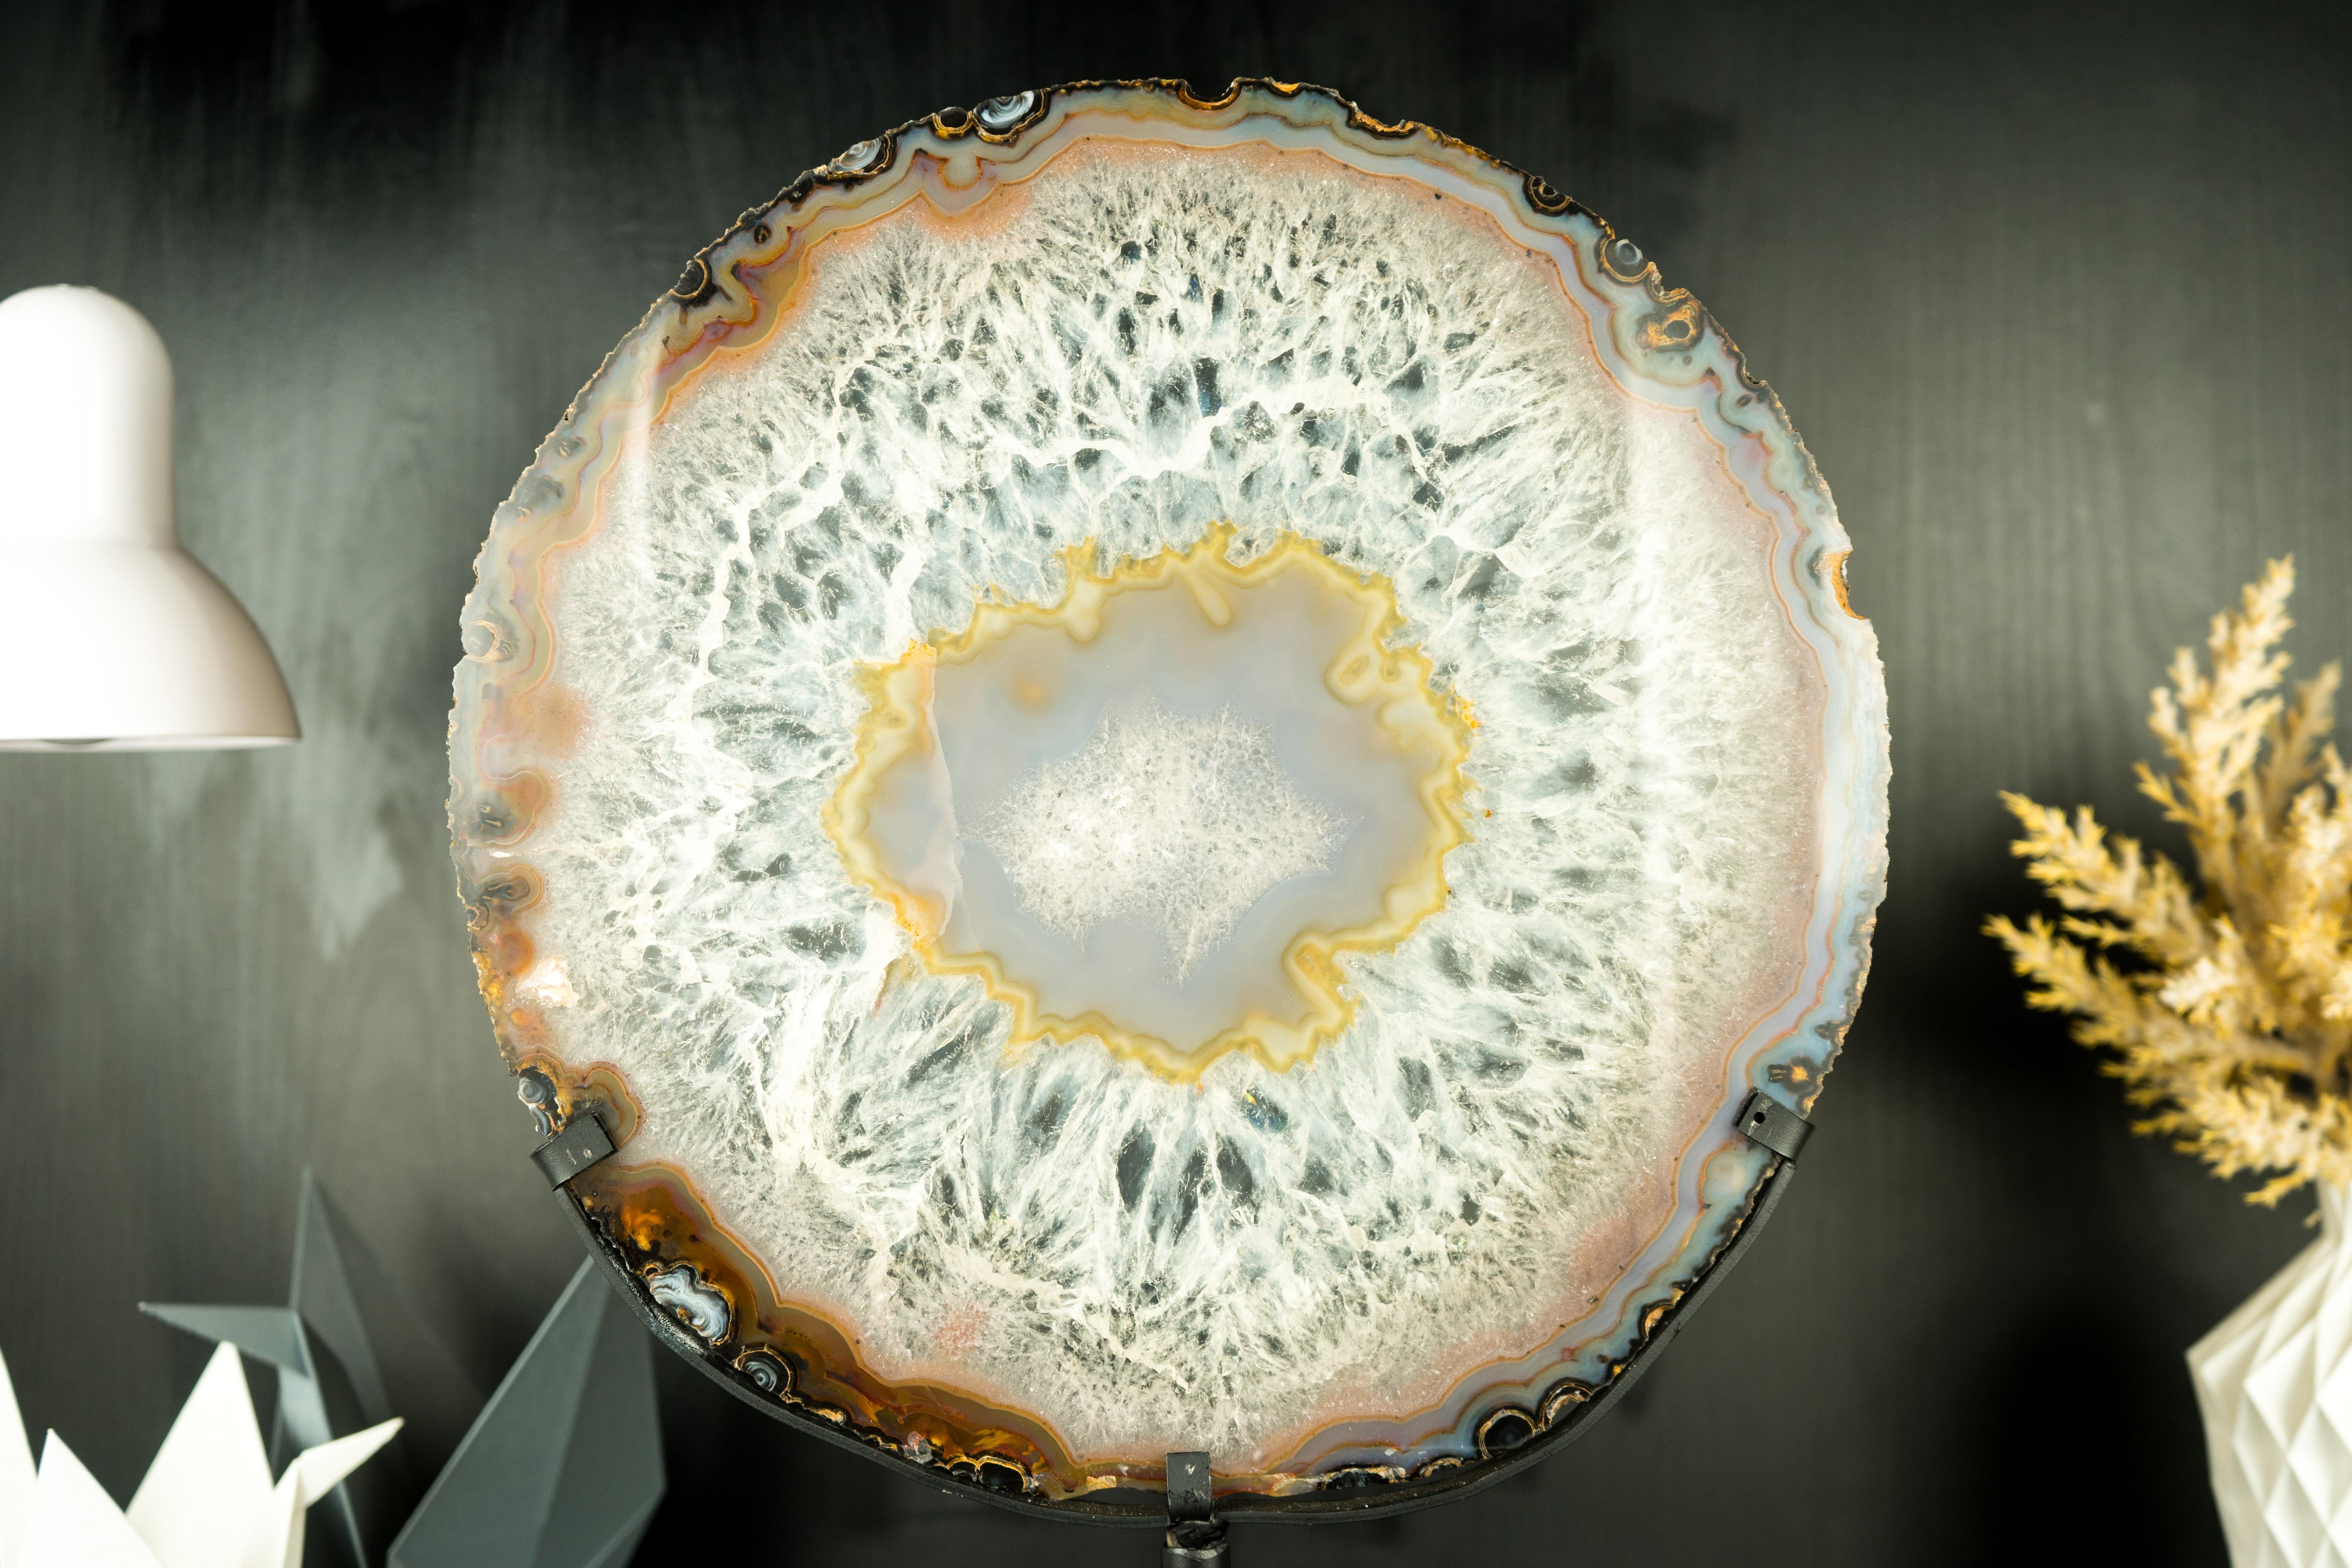 Gallery Grade Large Lace Agate Slice, with Ice-Like Crystal and Colorful Agate 11